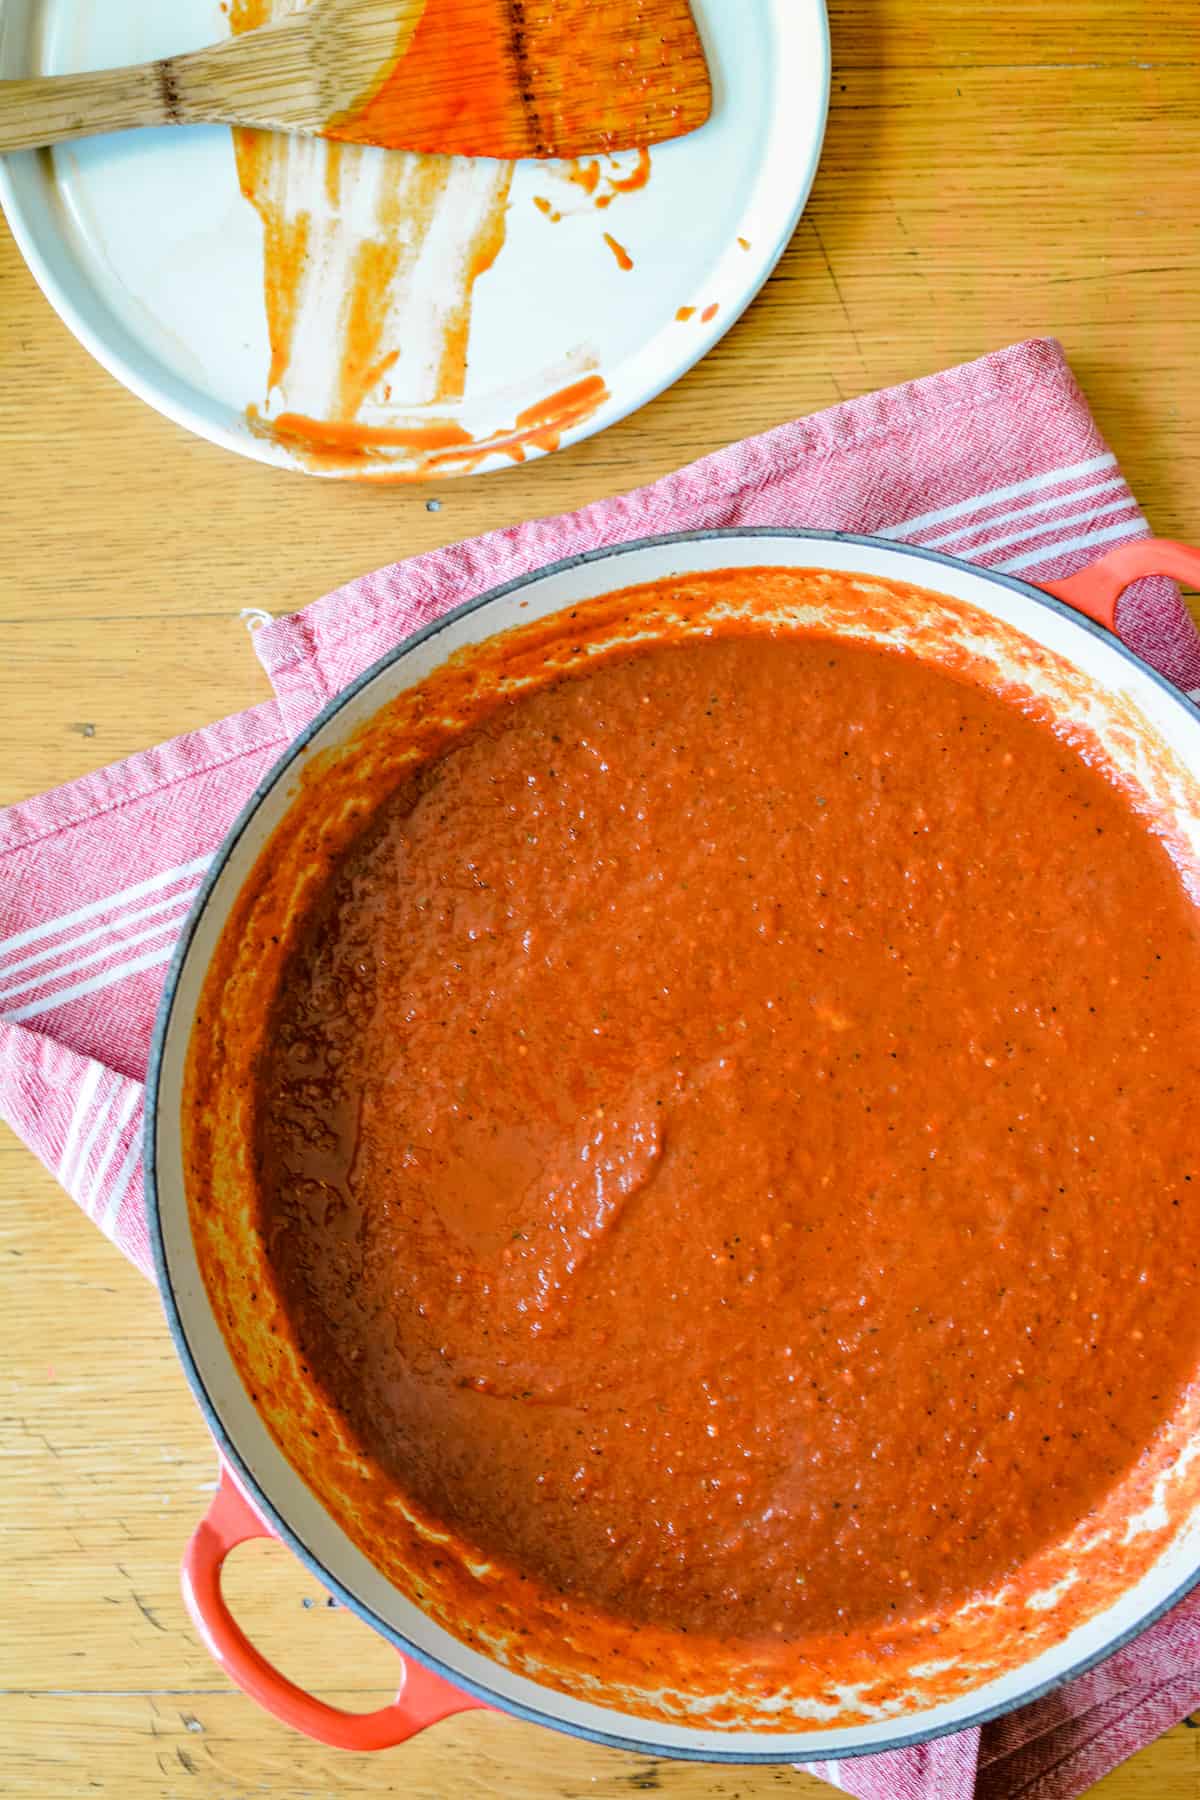 Here’s a simple recipe for Roasted Red Pepper Sauce with Guajillo Chiles that you will want to put on everything! A delicious and versatile sauce for topping all your favorite Mexican food recipes from enchiladas to chilaquiles. Vegan, paleo-friendly, and gluten-free! #guajillochiles #mexicanrecipe #roastedredpeppers #guajillosauce